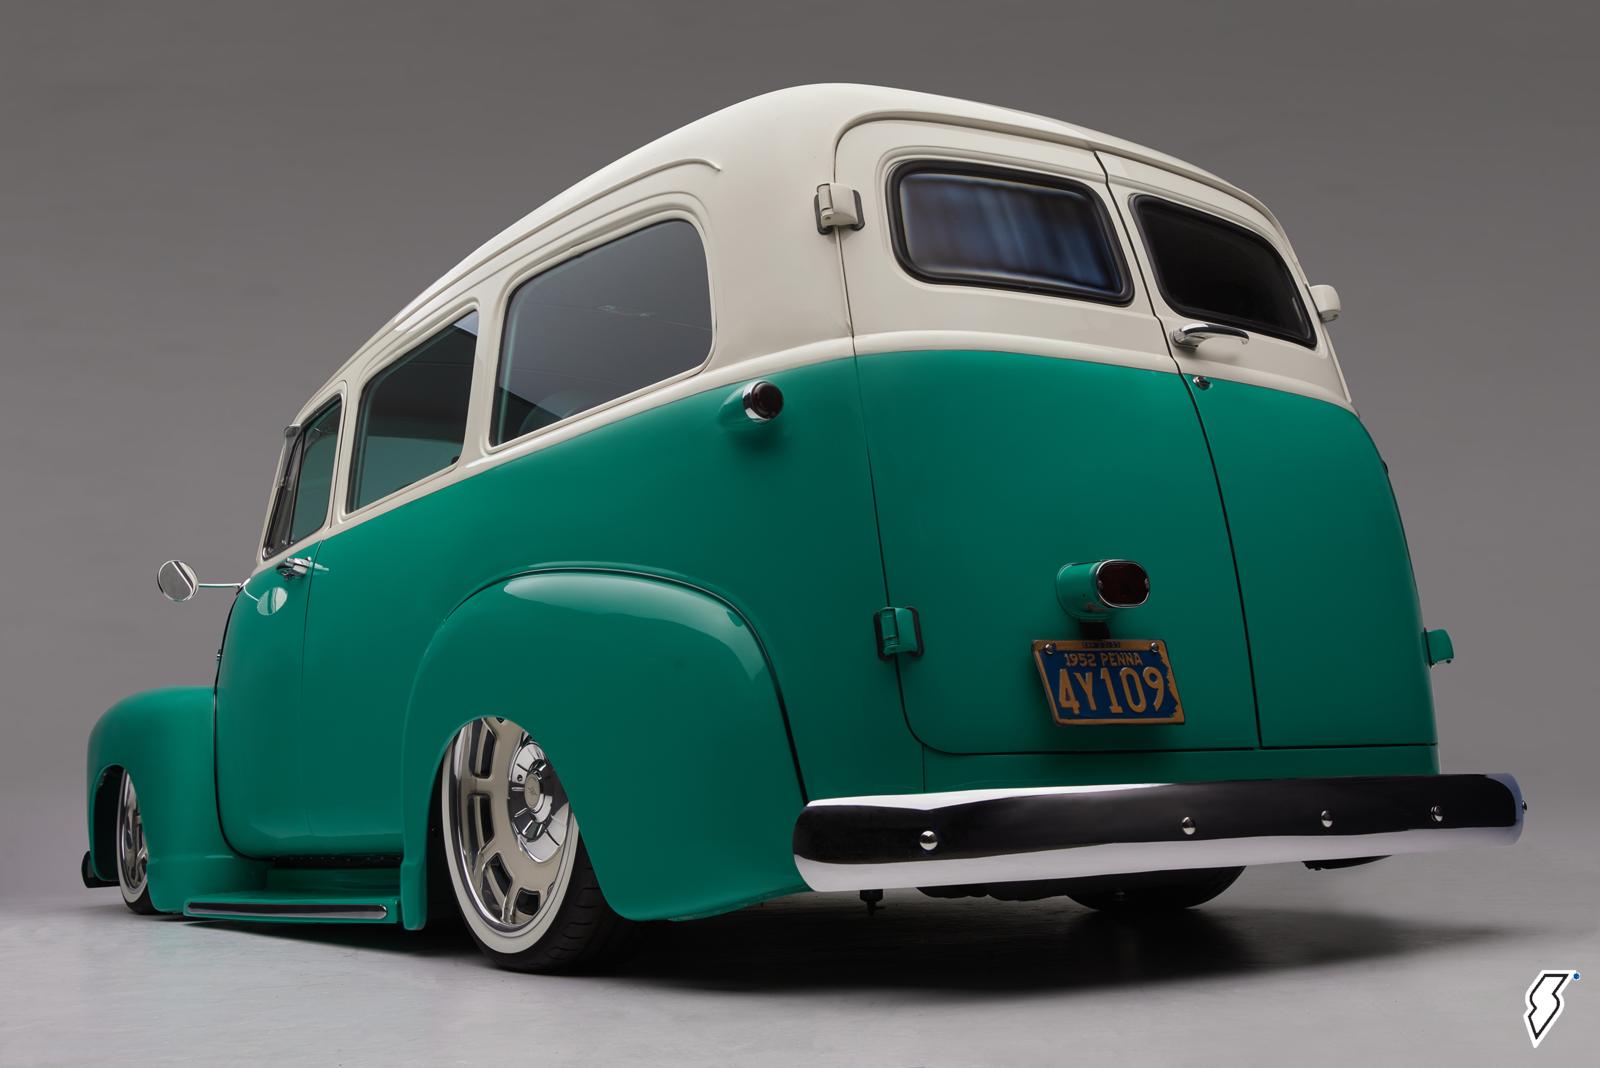 This 1952 Chevrolet Suburban Carryall Is an O.G. SUV